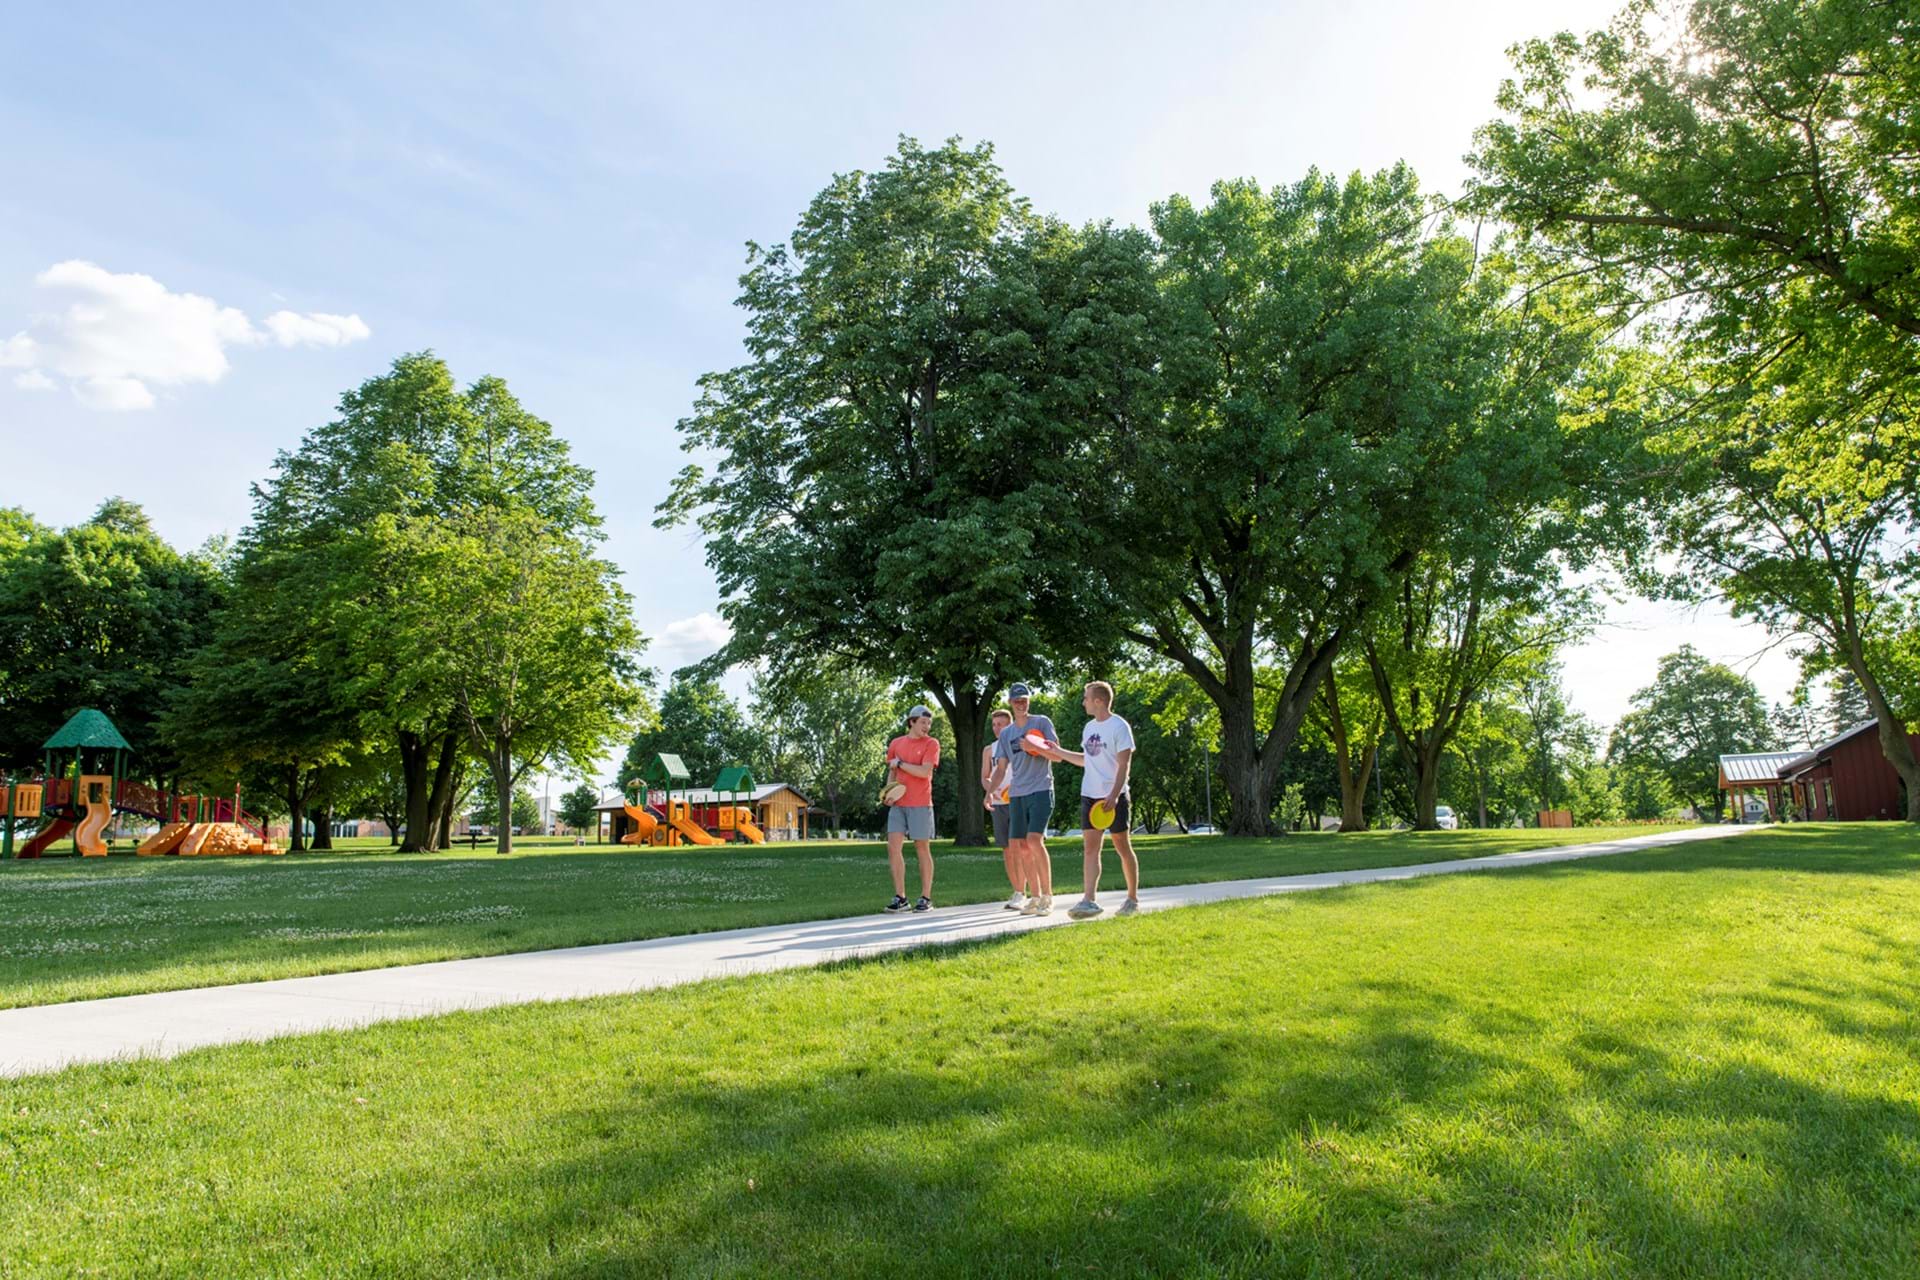 The disc golf course at Children's Park offers 9 paved tees and a total of 18 holes.